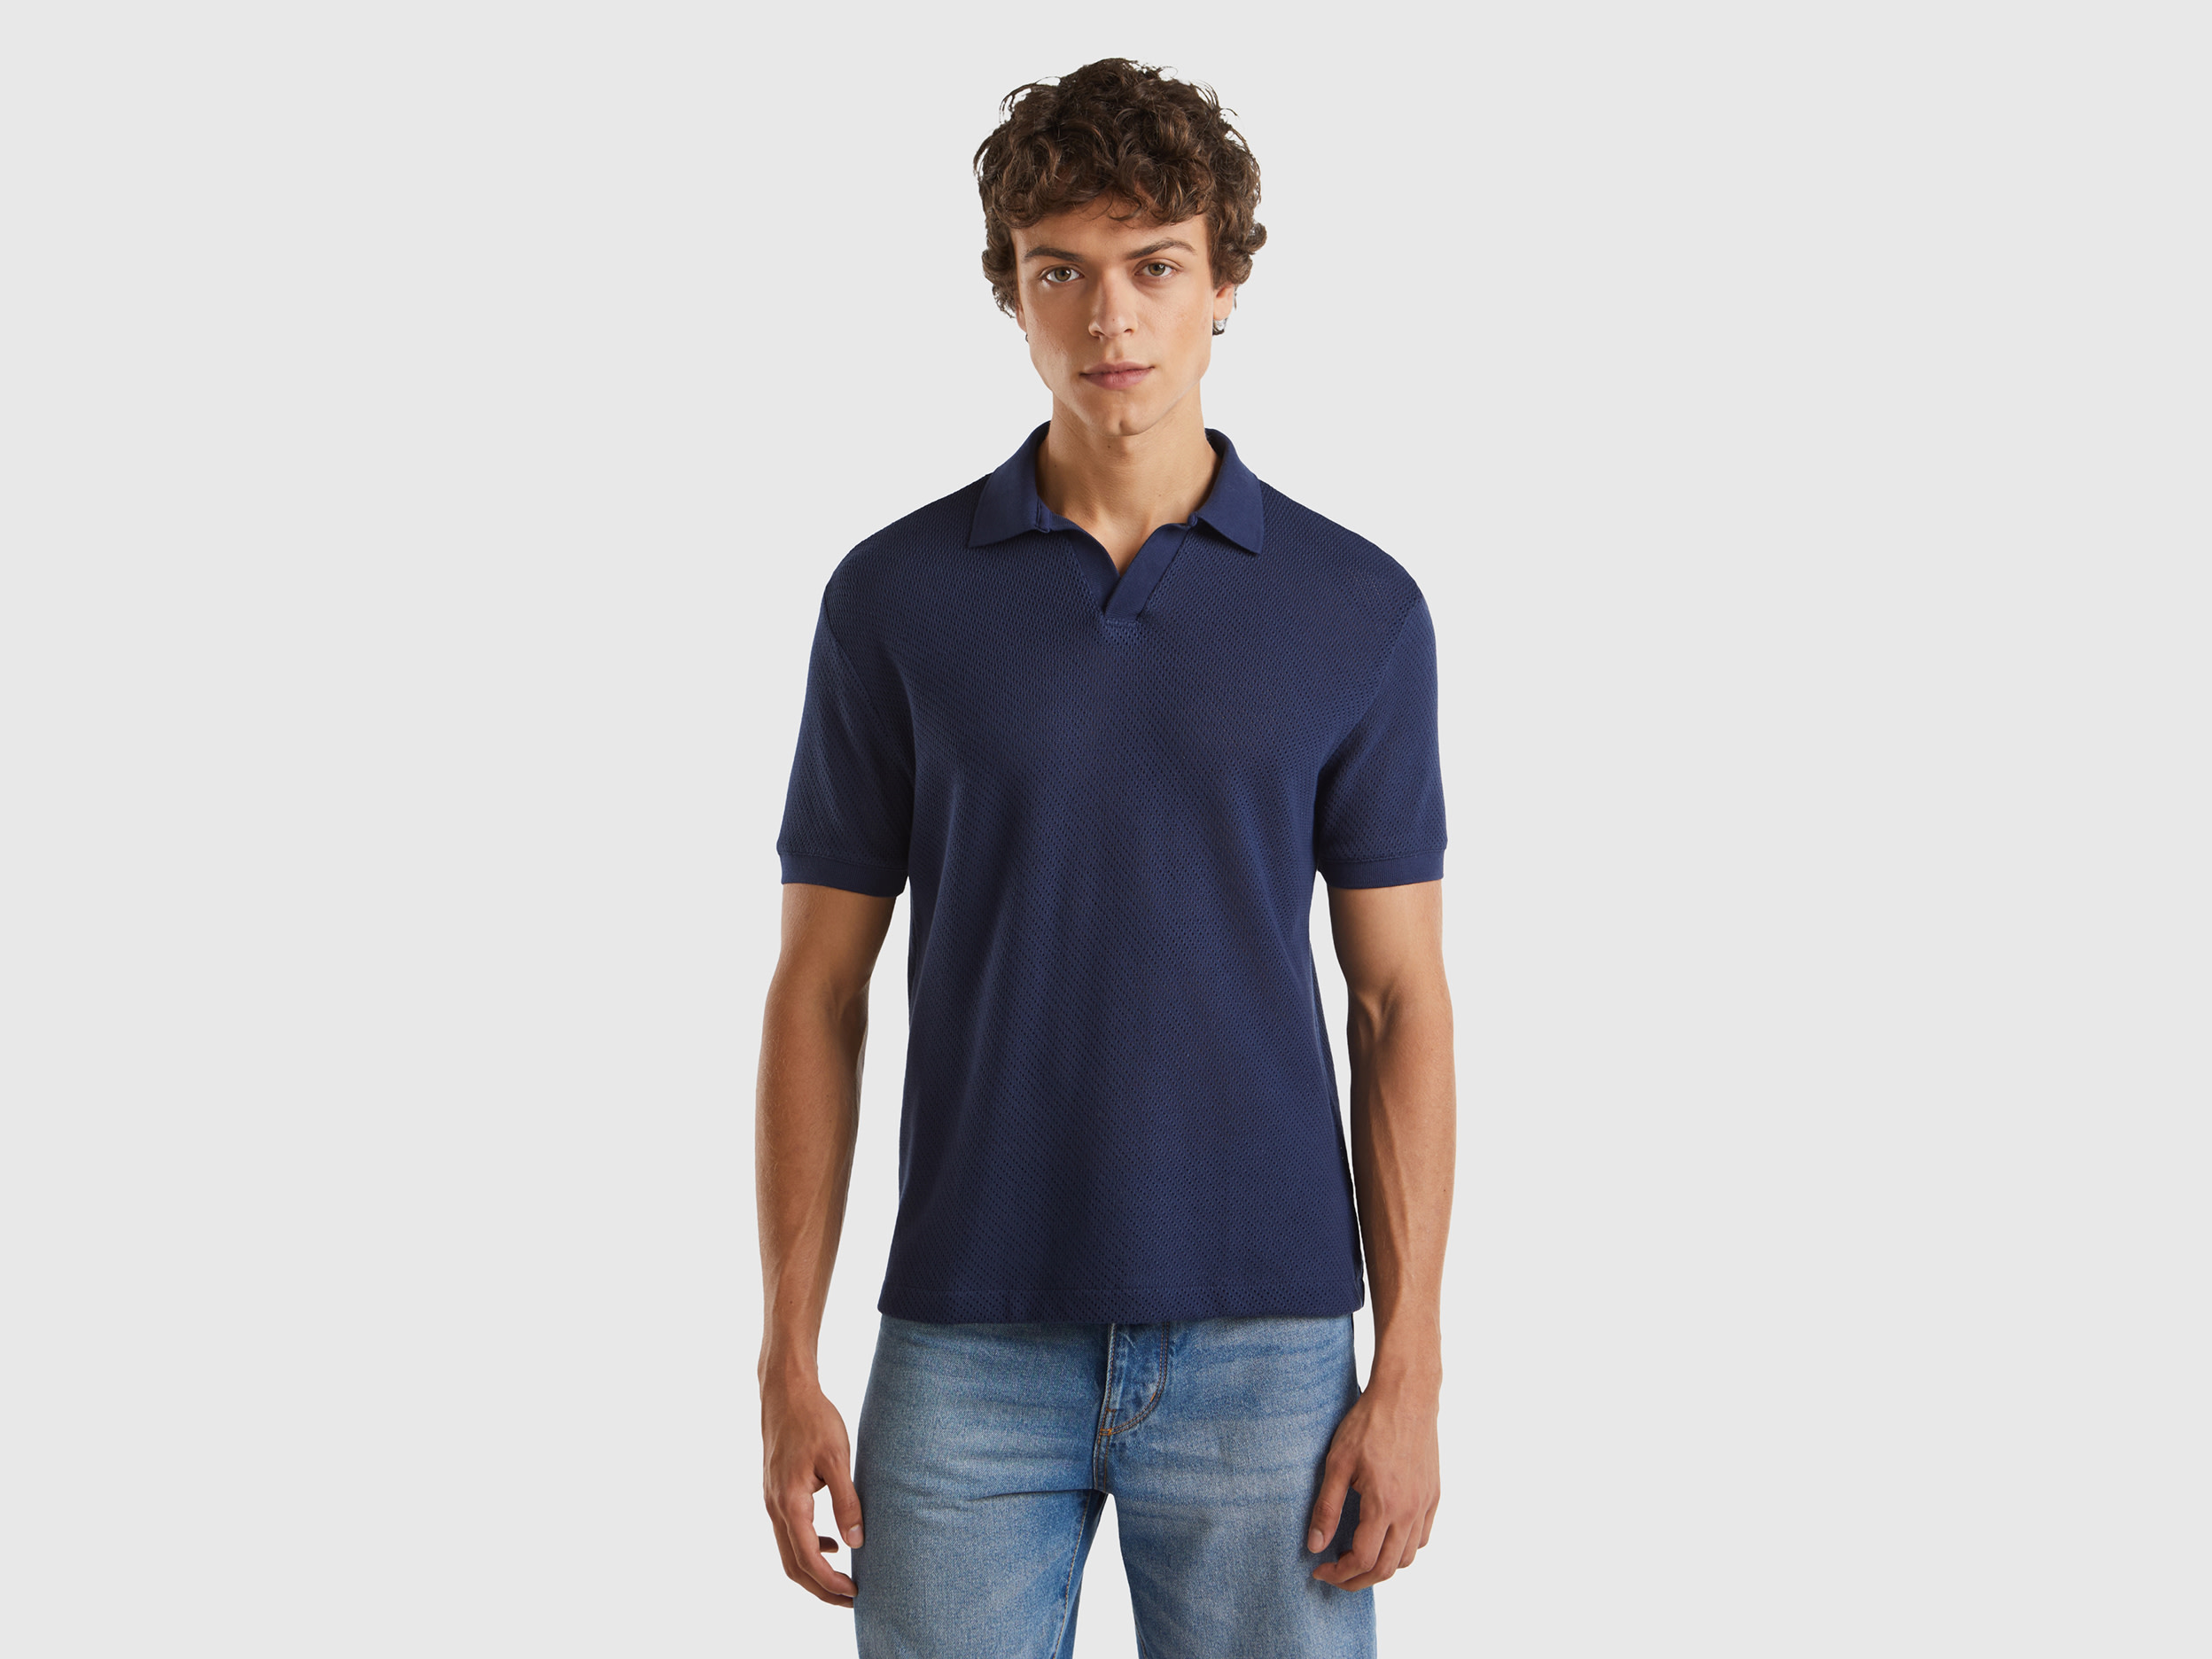 Image of Benetton, Perforated Cotton Polo Shirt, size S, Dark Blue, Men